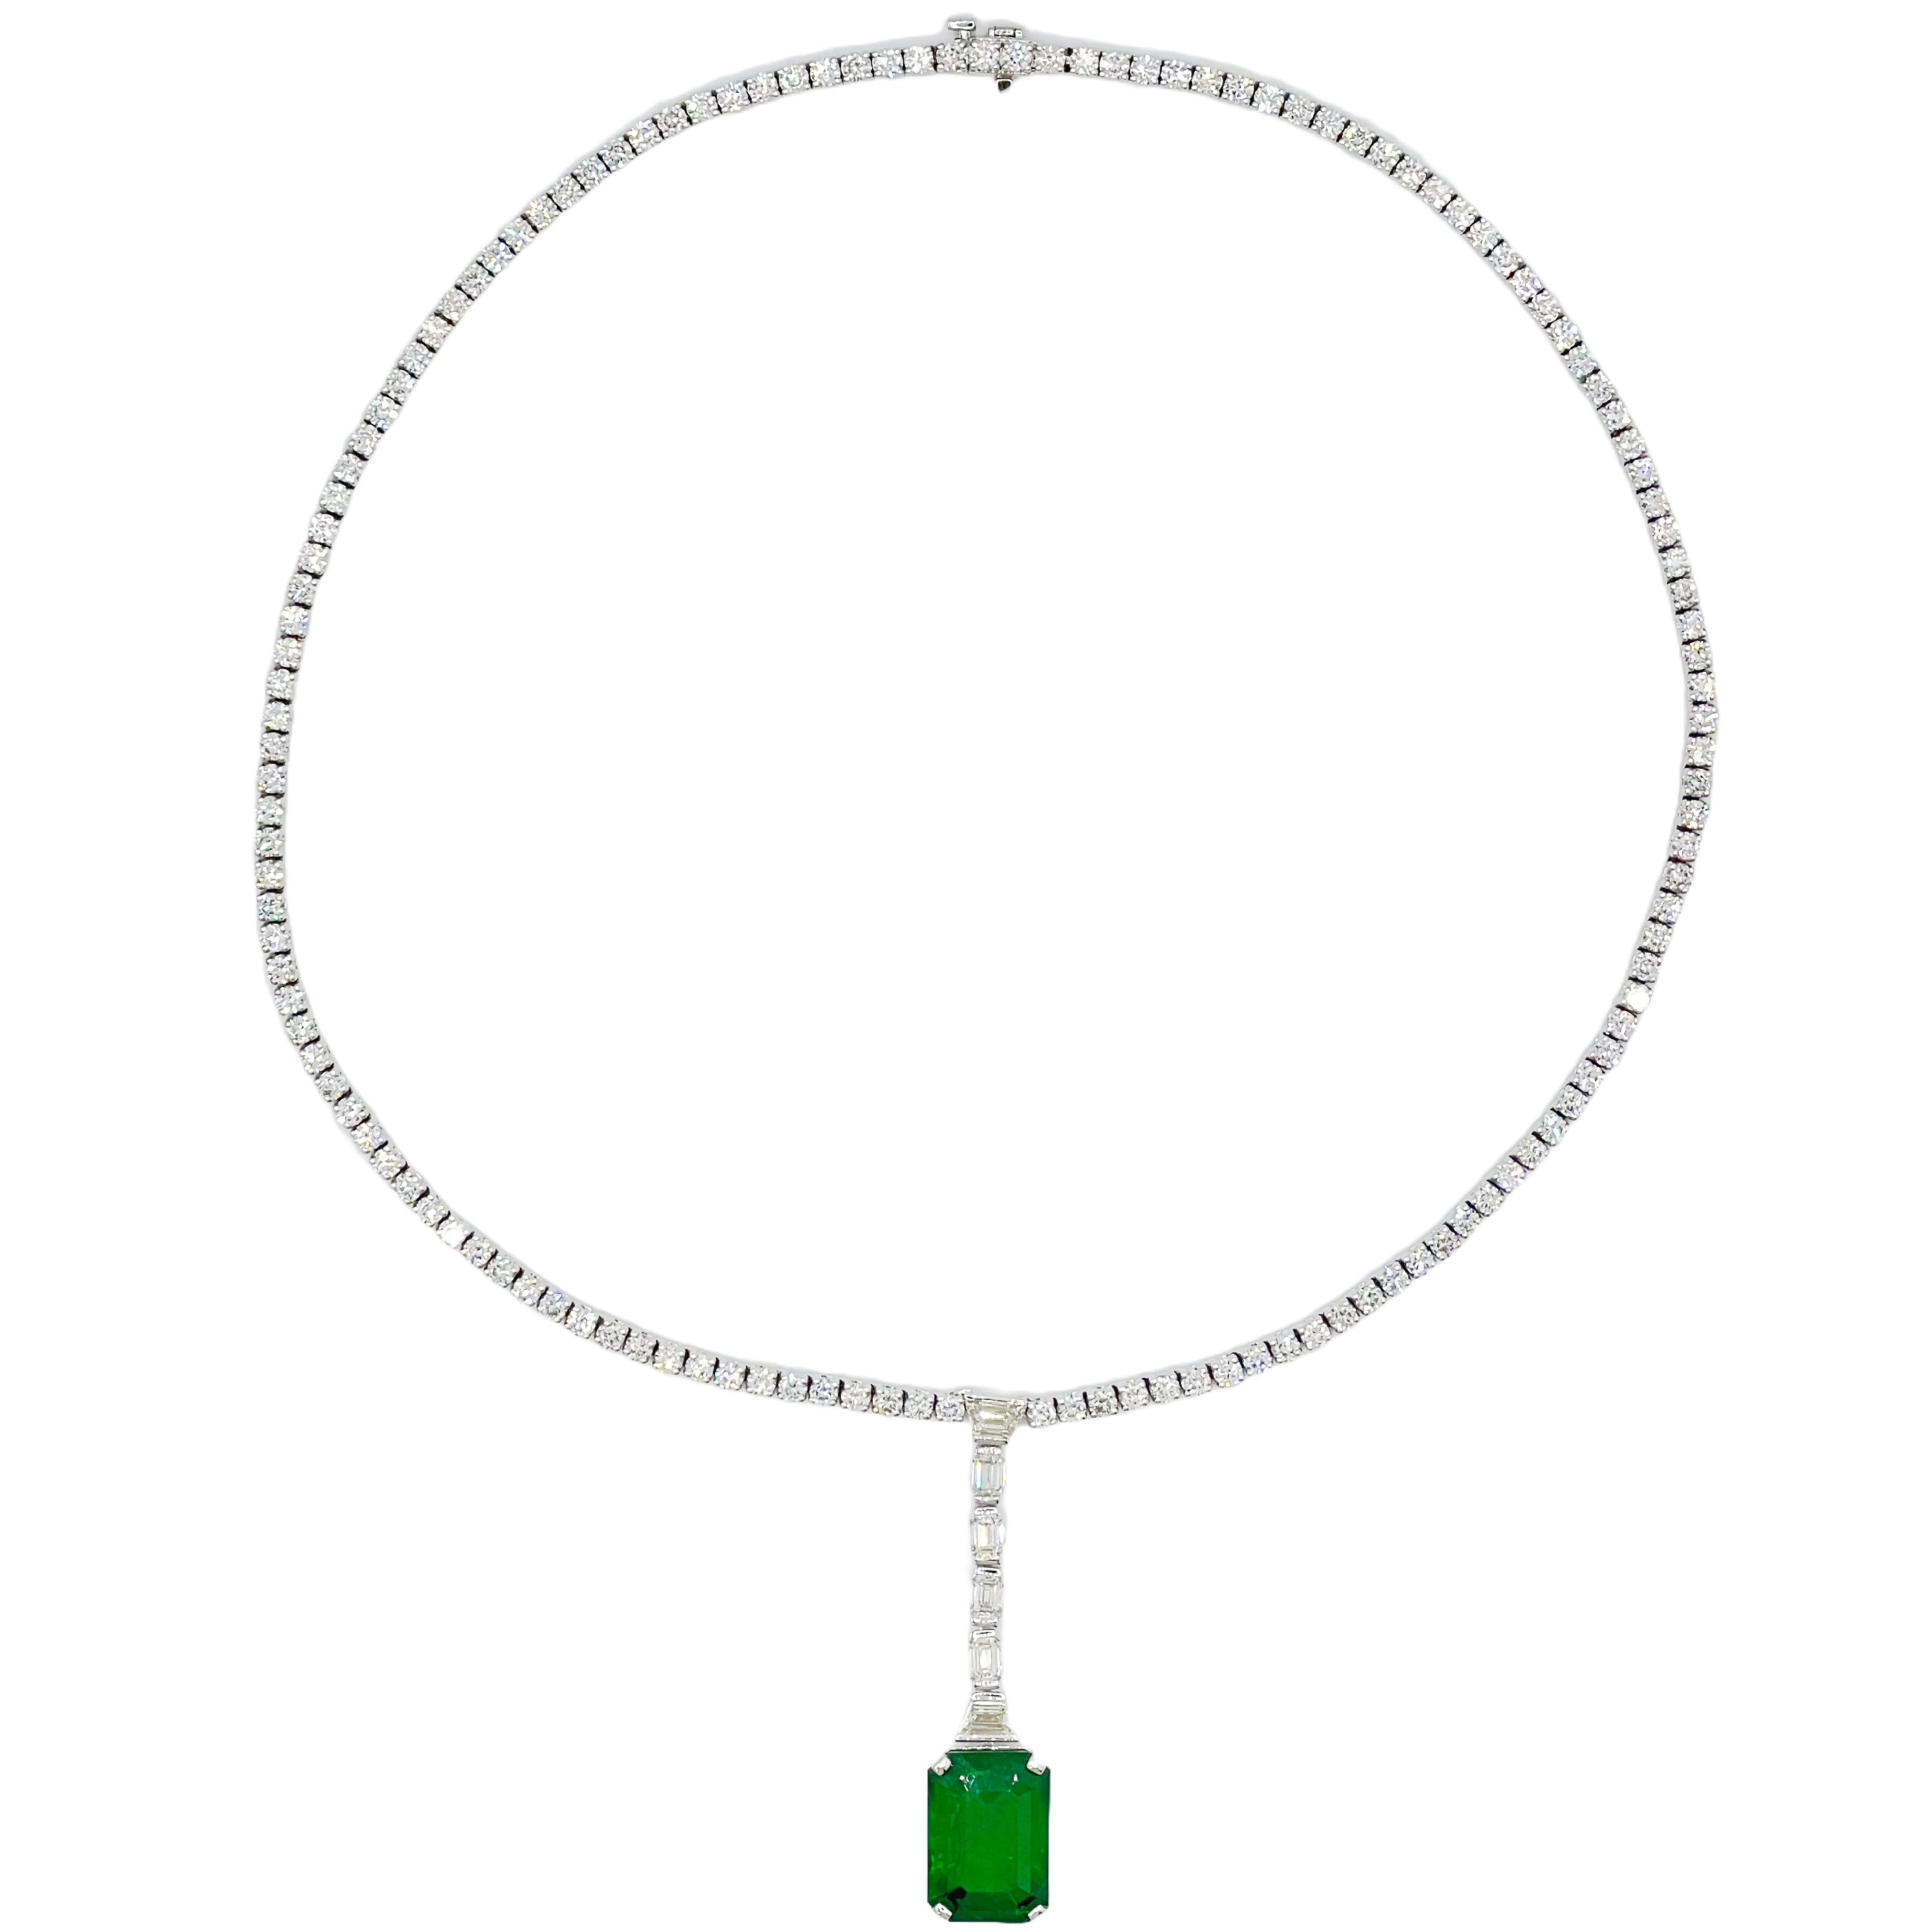 Necklace-18KW 1EMER-14.13CT 6FANCY-2.31CT 136RD-12.25CT CDC